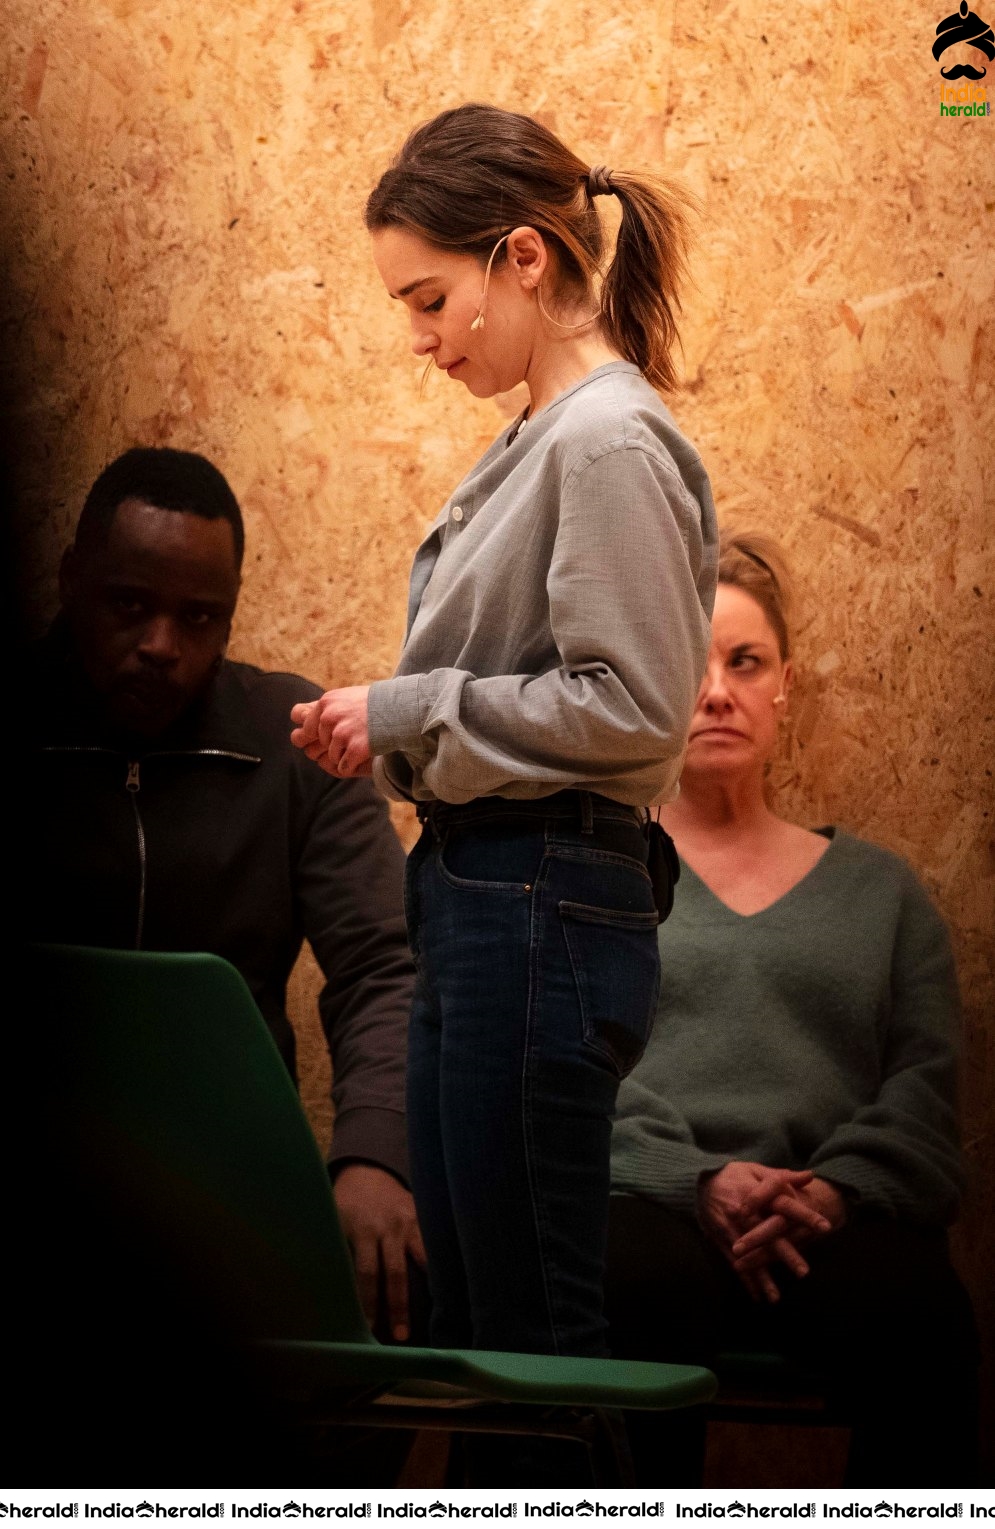 Emilia Clarke performing at The Seagull in London